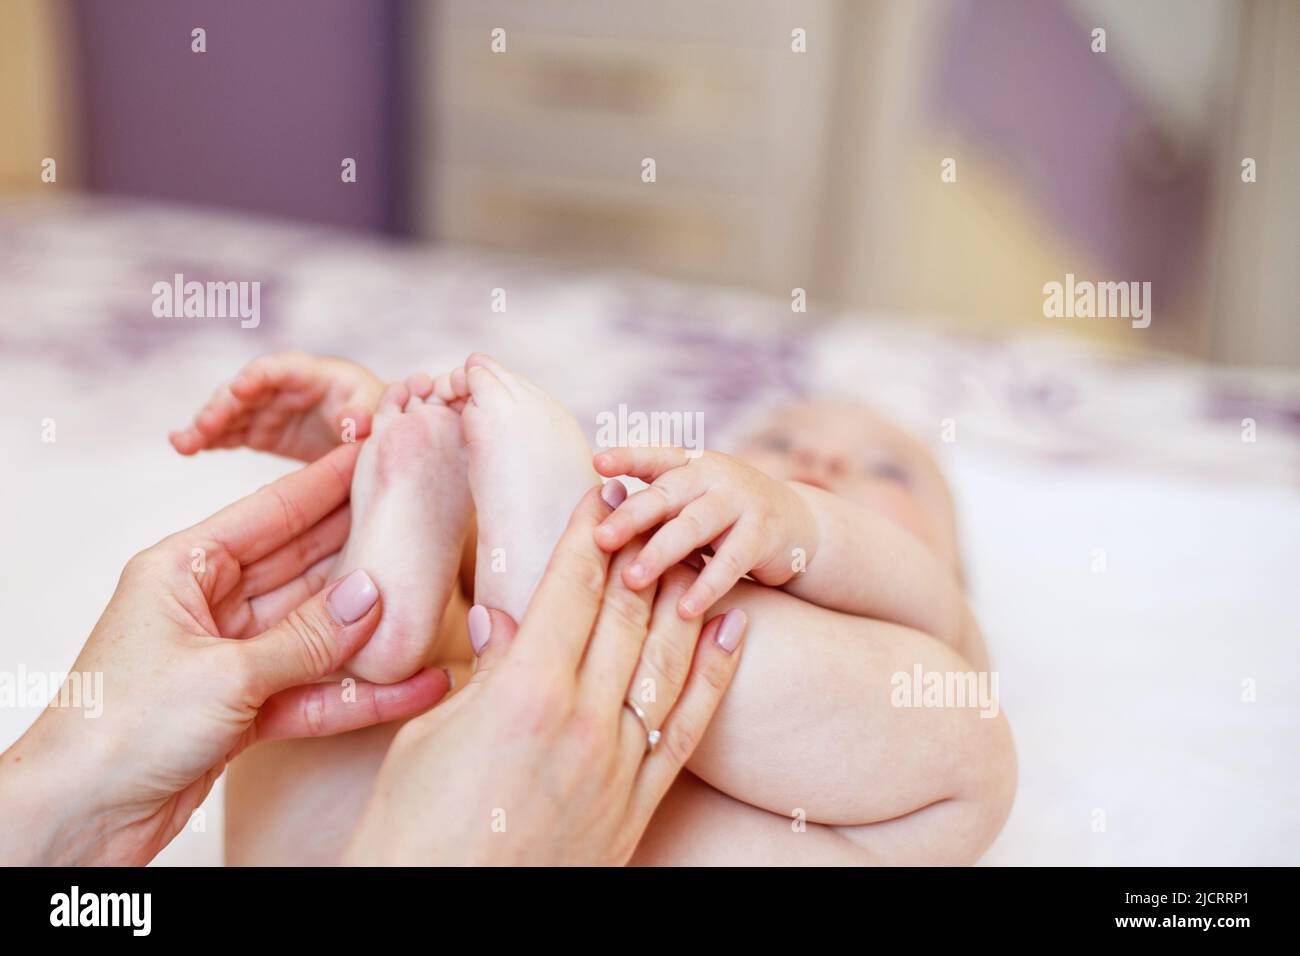 Mom Mom does gymnastics for a child. Mother massaging baby in a bed at home Stock Photo